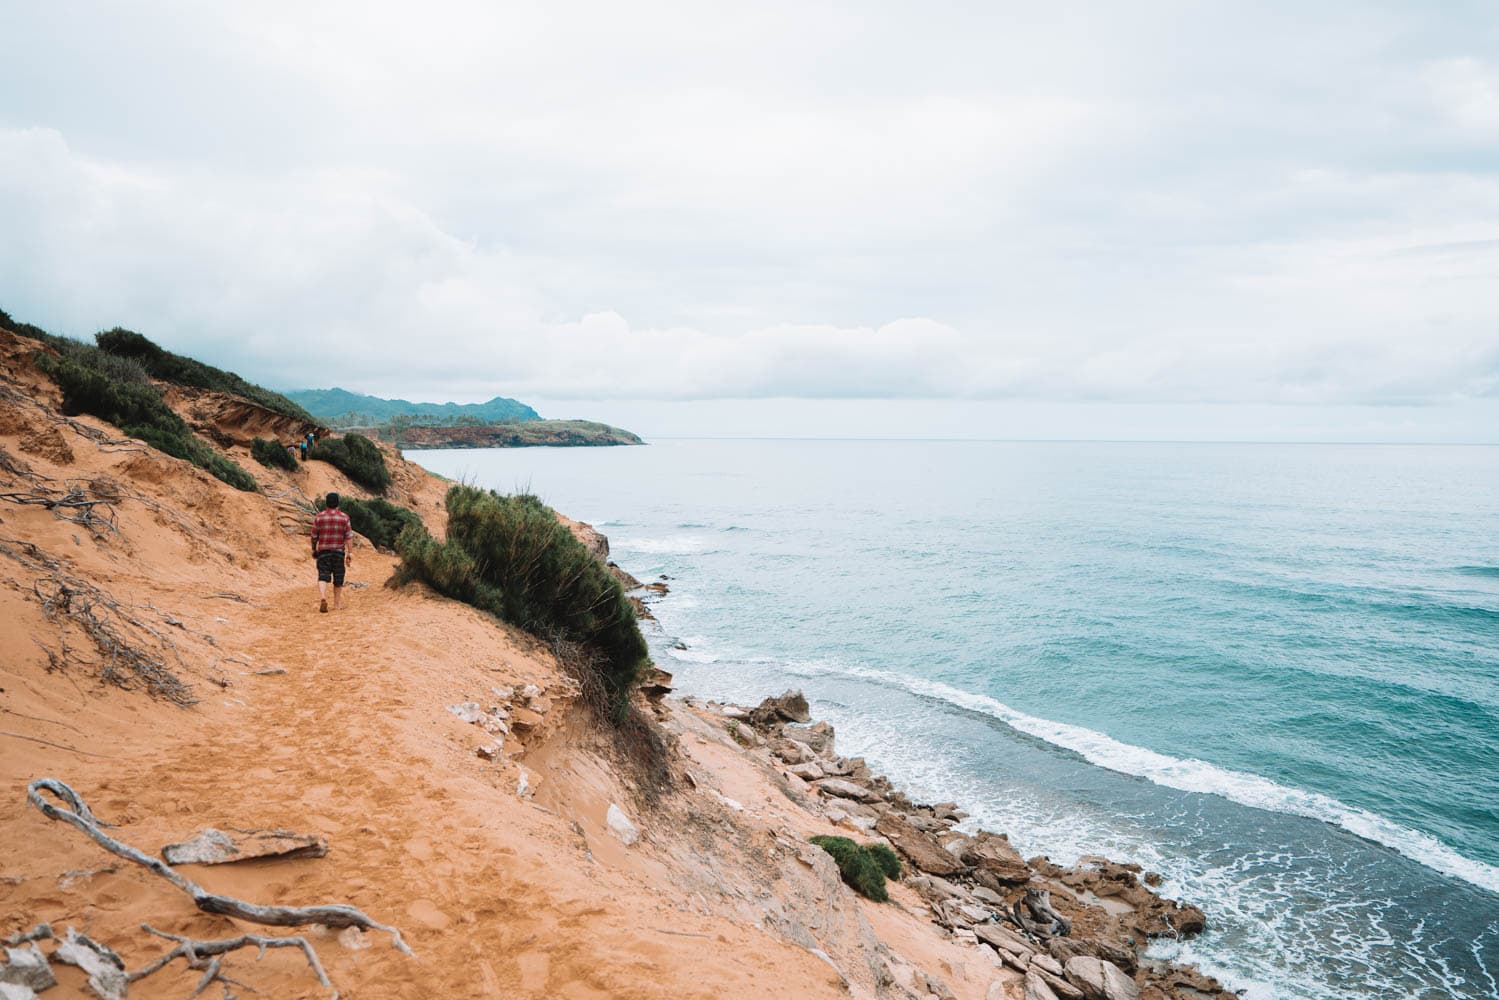 Mahaulepu Beach Trail // Discover the best things to do in Kauai for outdoor adventurers including scenic waterfall hikes, secluded beaches, water activities, & more!